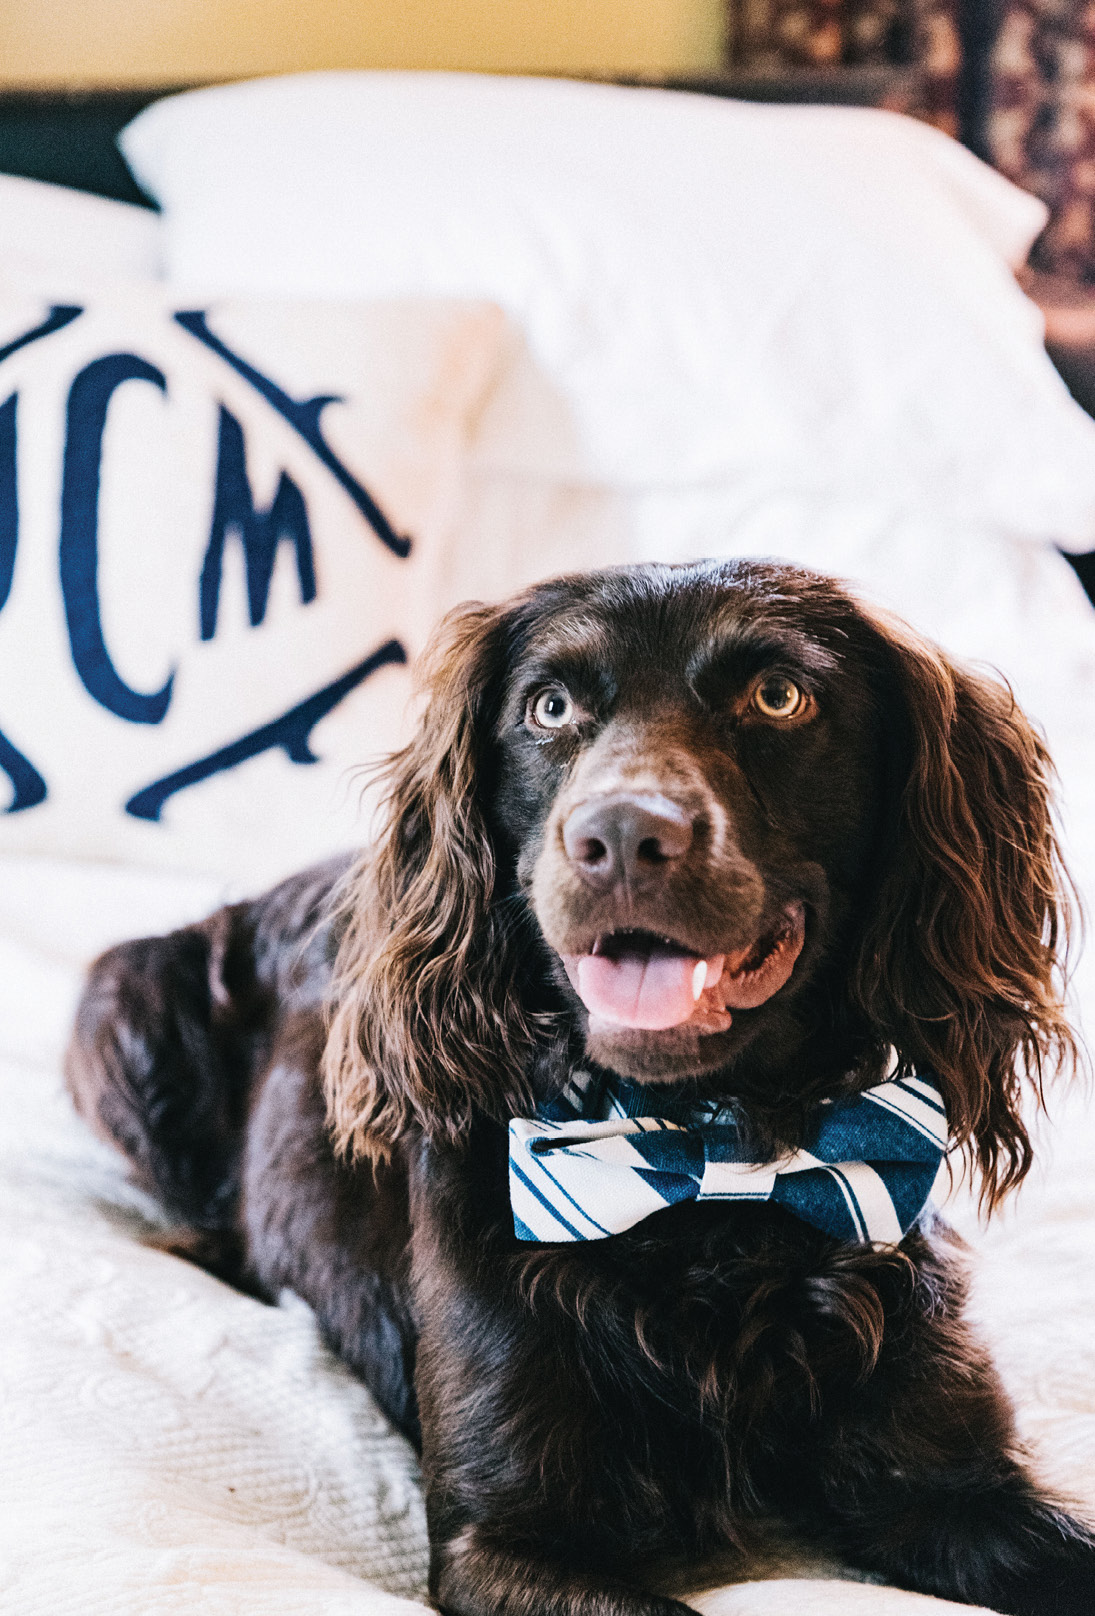 posh pup The Viscount Gabriel Cipriani of Windermere (aka “Cips”) awaits his debut: “Know how your guests feel about pets; if any are wary, perhaps introduce your dog on a leash or send him out for a playdate,” advises Mitchell